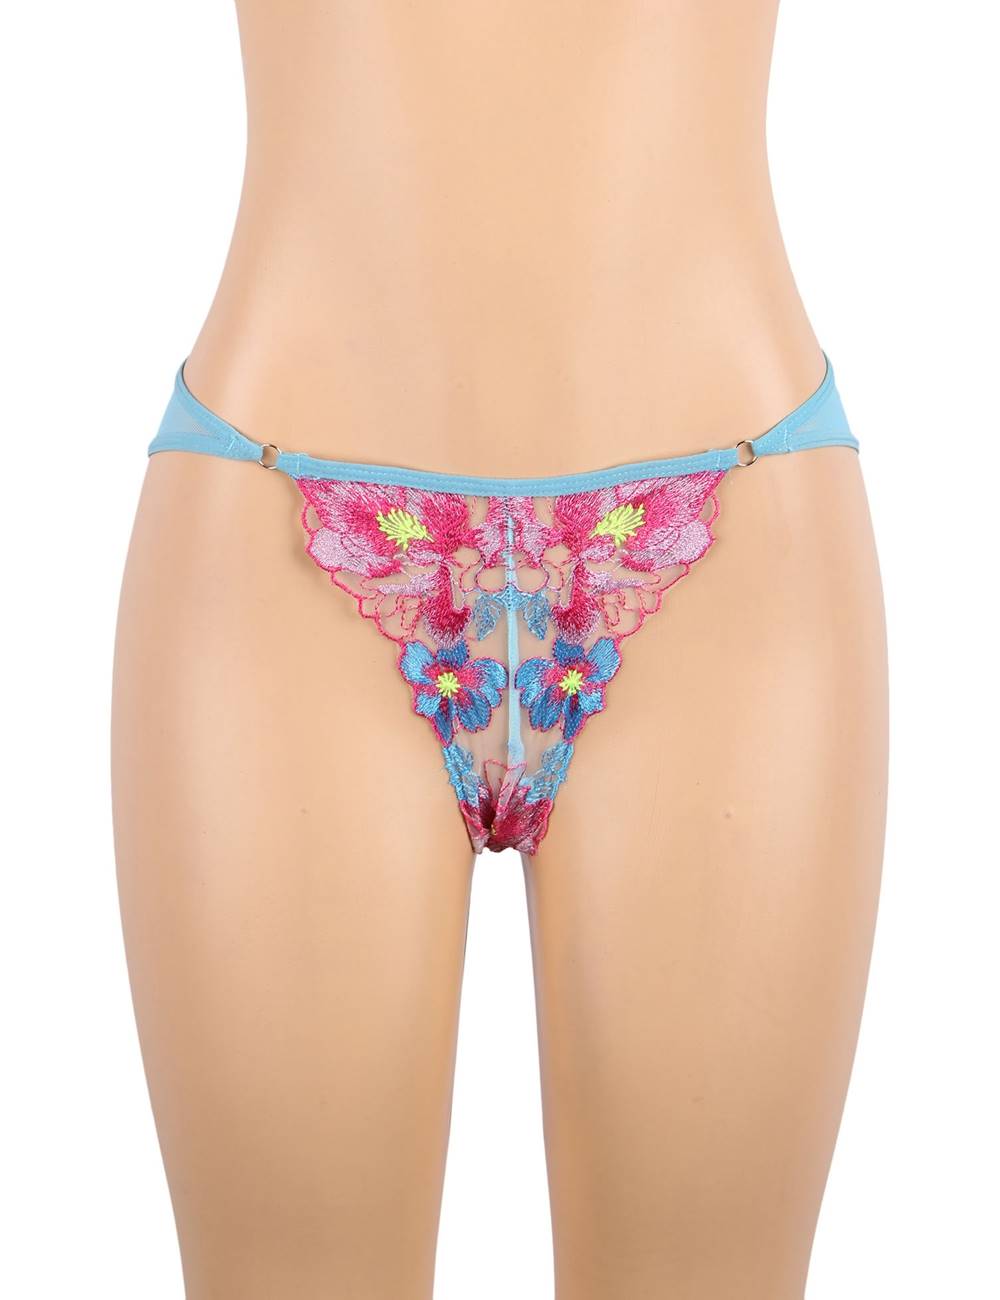 Floral Embroidery Mesh Cheeky Panty 81085 - Aqua/Pink